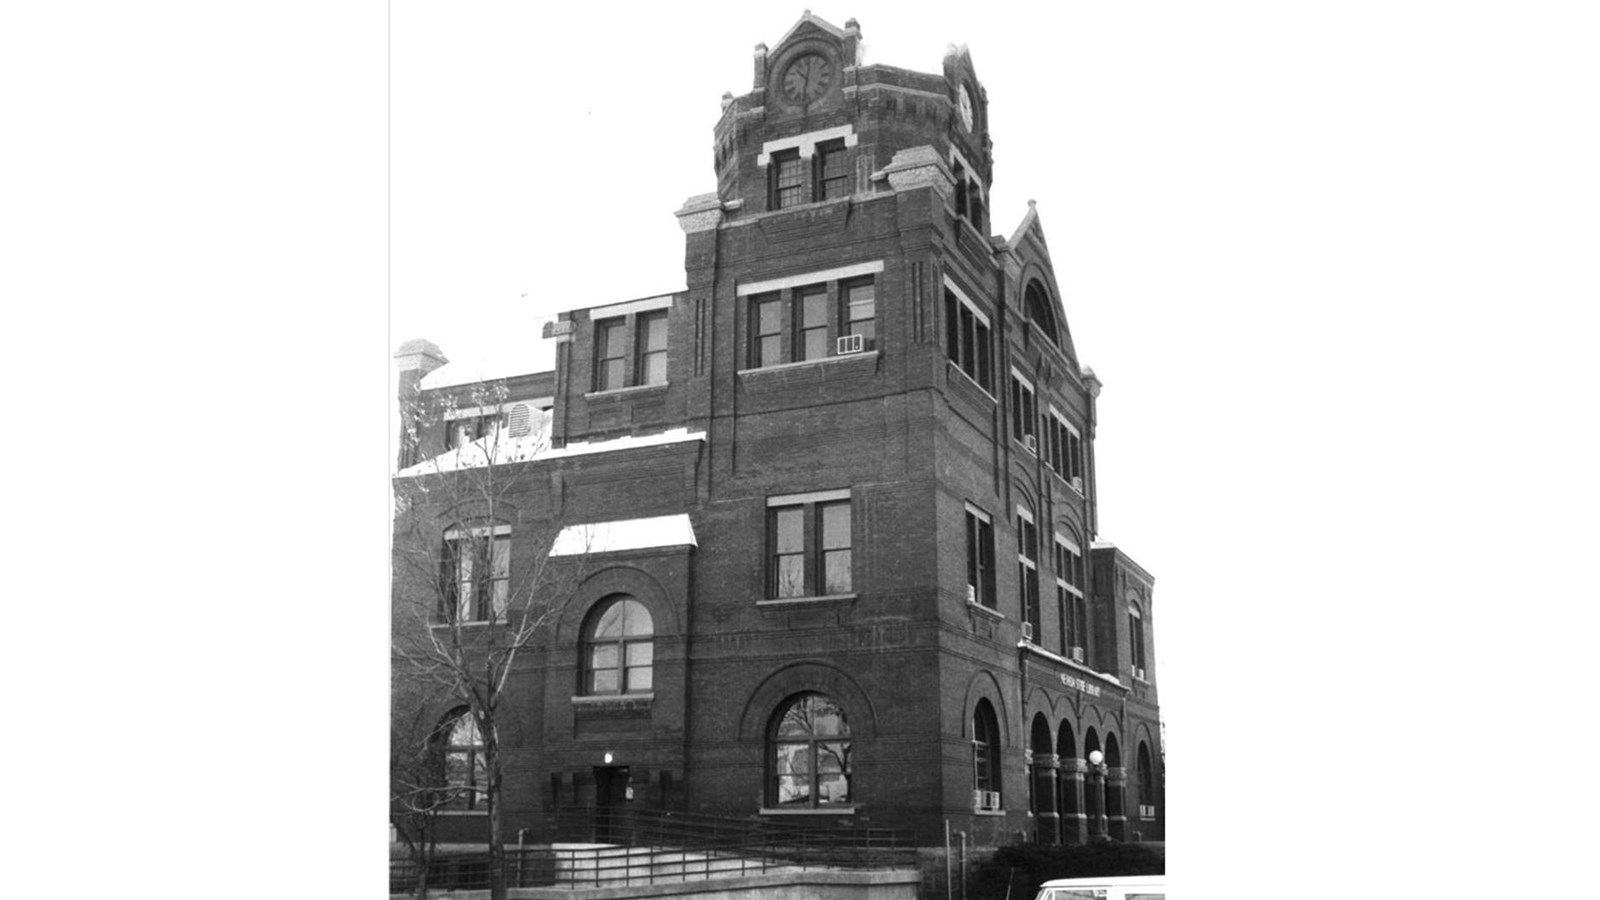 Historic black and white image of a tall, four story brick building with impressive roof facades.